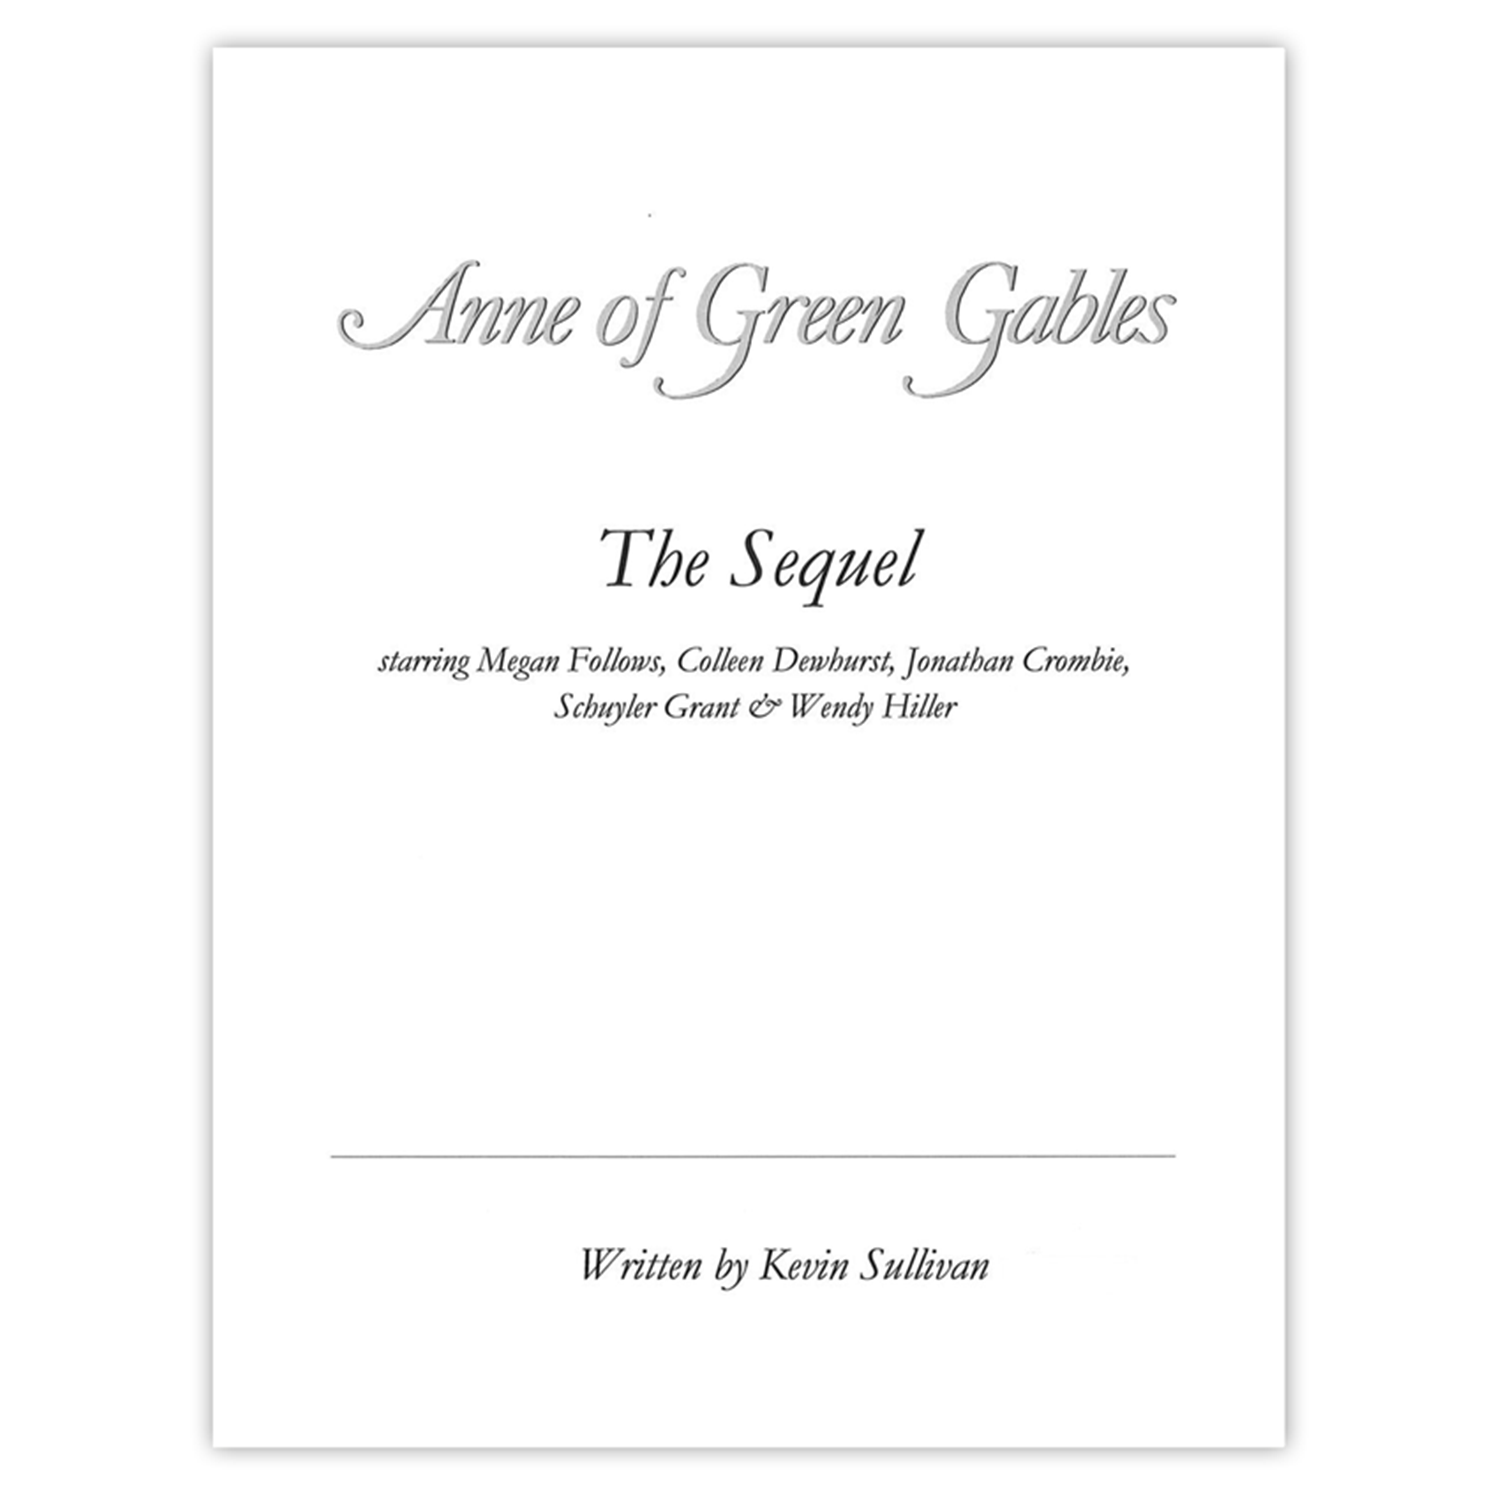 Anne of Green Gables: The Sequel Autographed Screenplay